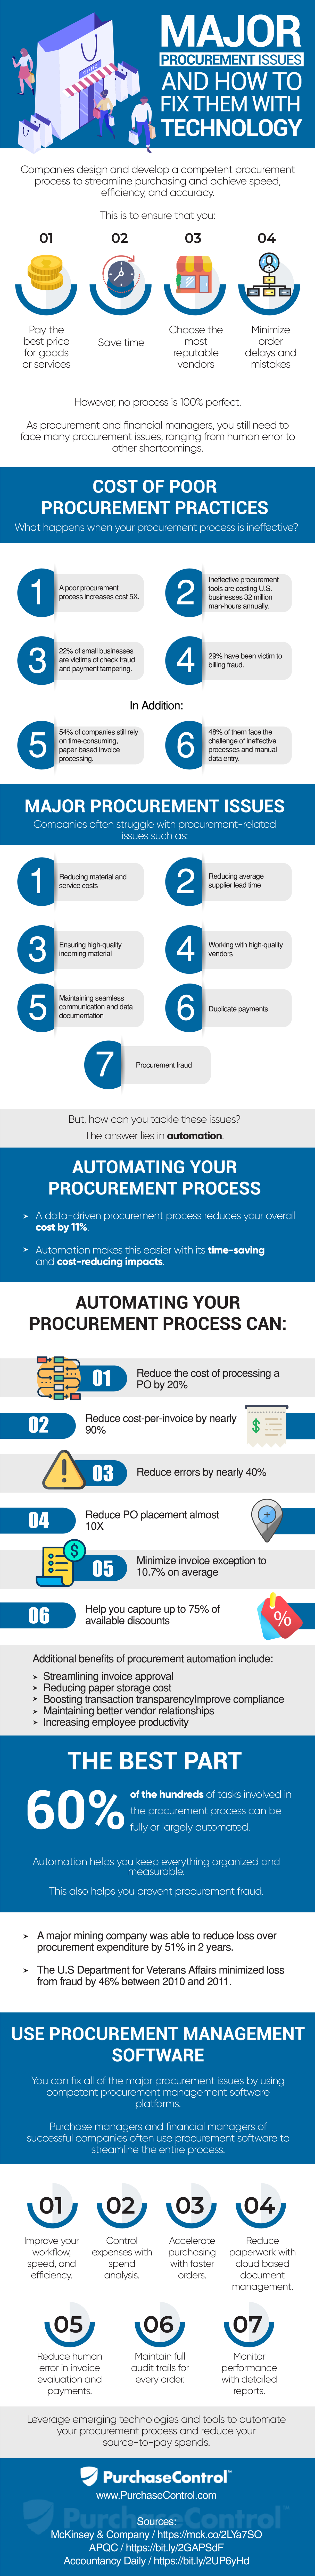 How to Fix Procurement Issues with Automation